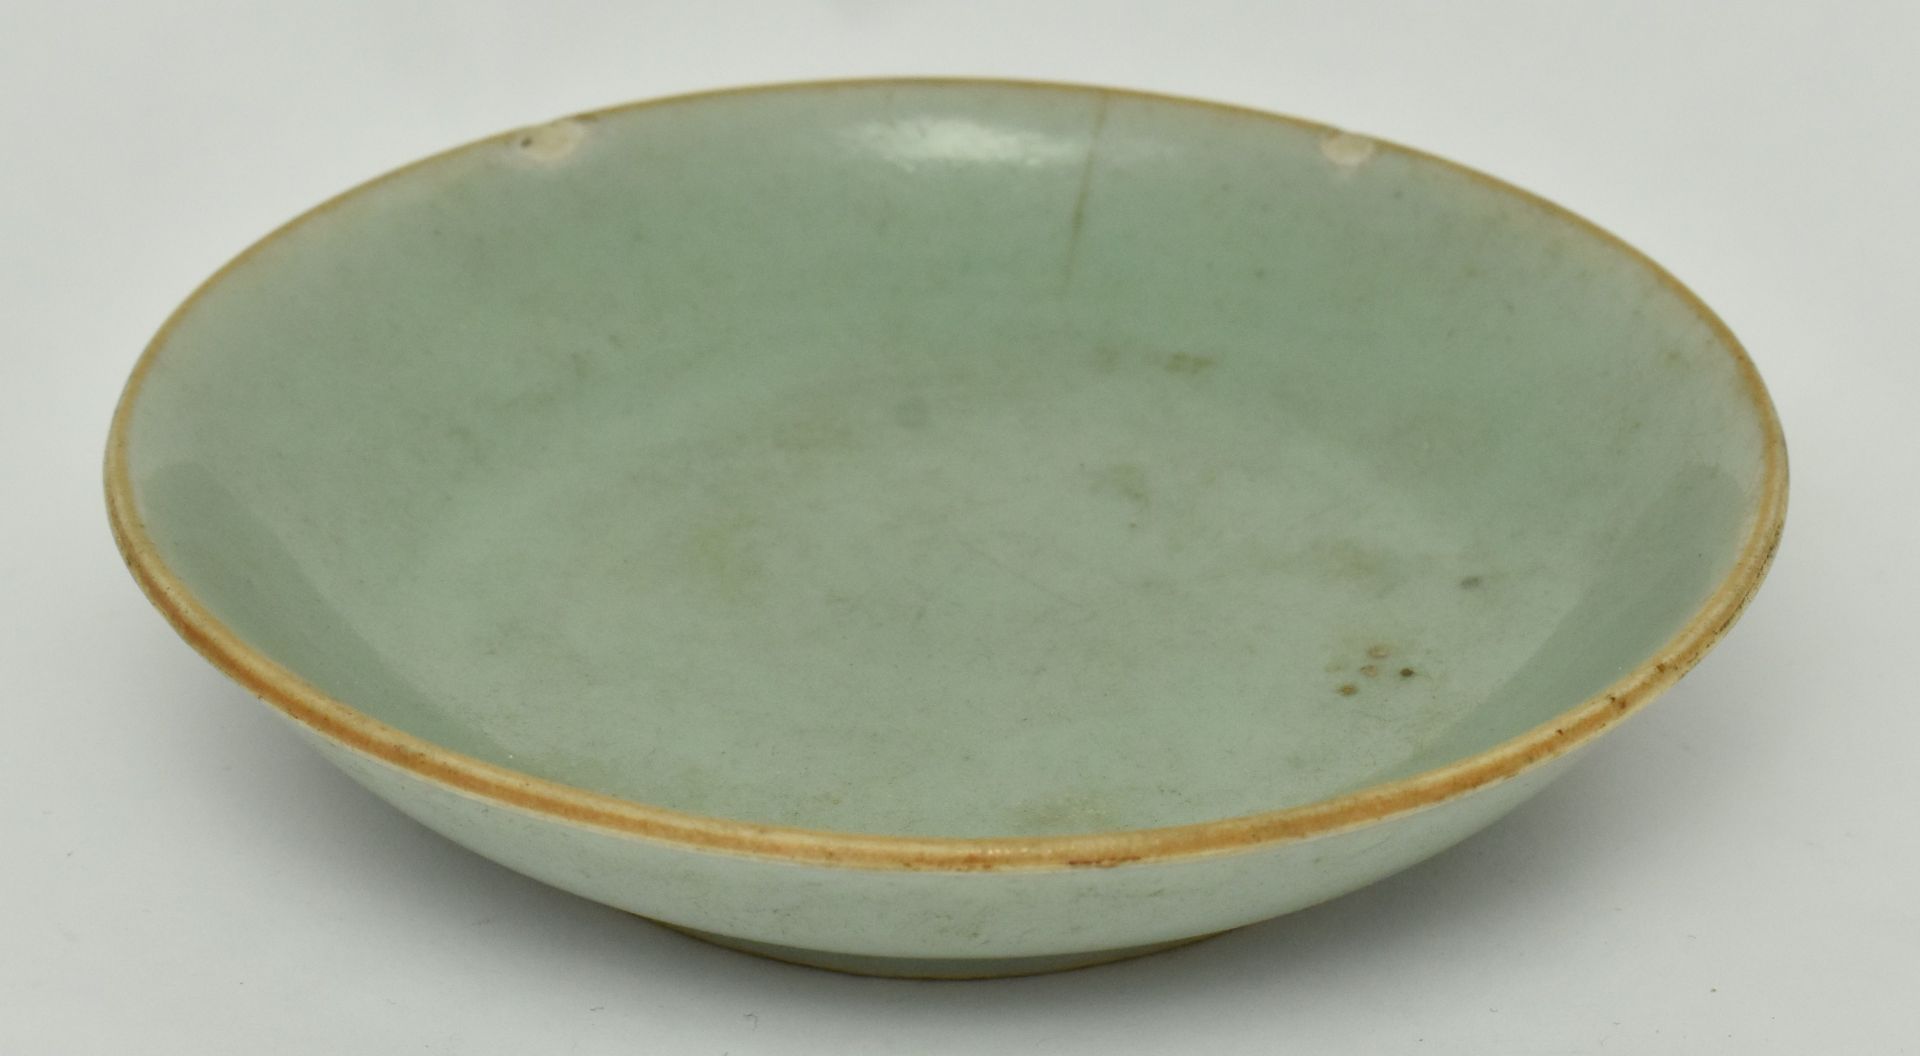 TWO QING DYNASTY CELADON GLAZED DISHES 清 青釉 盘子两个 - Image 5 of 7